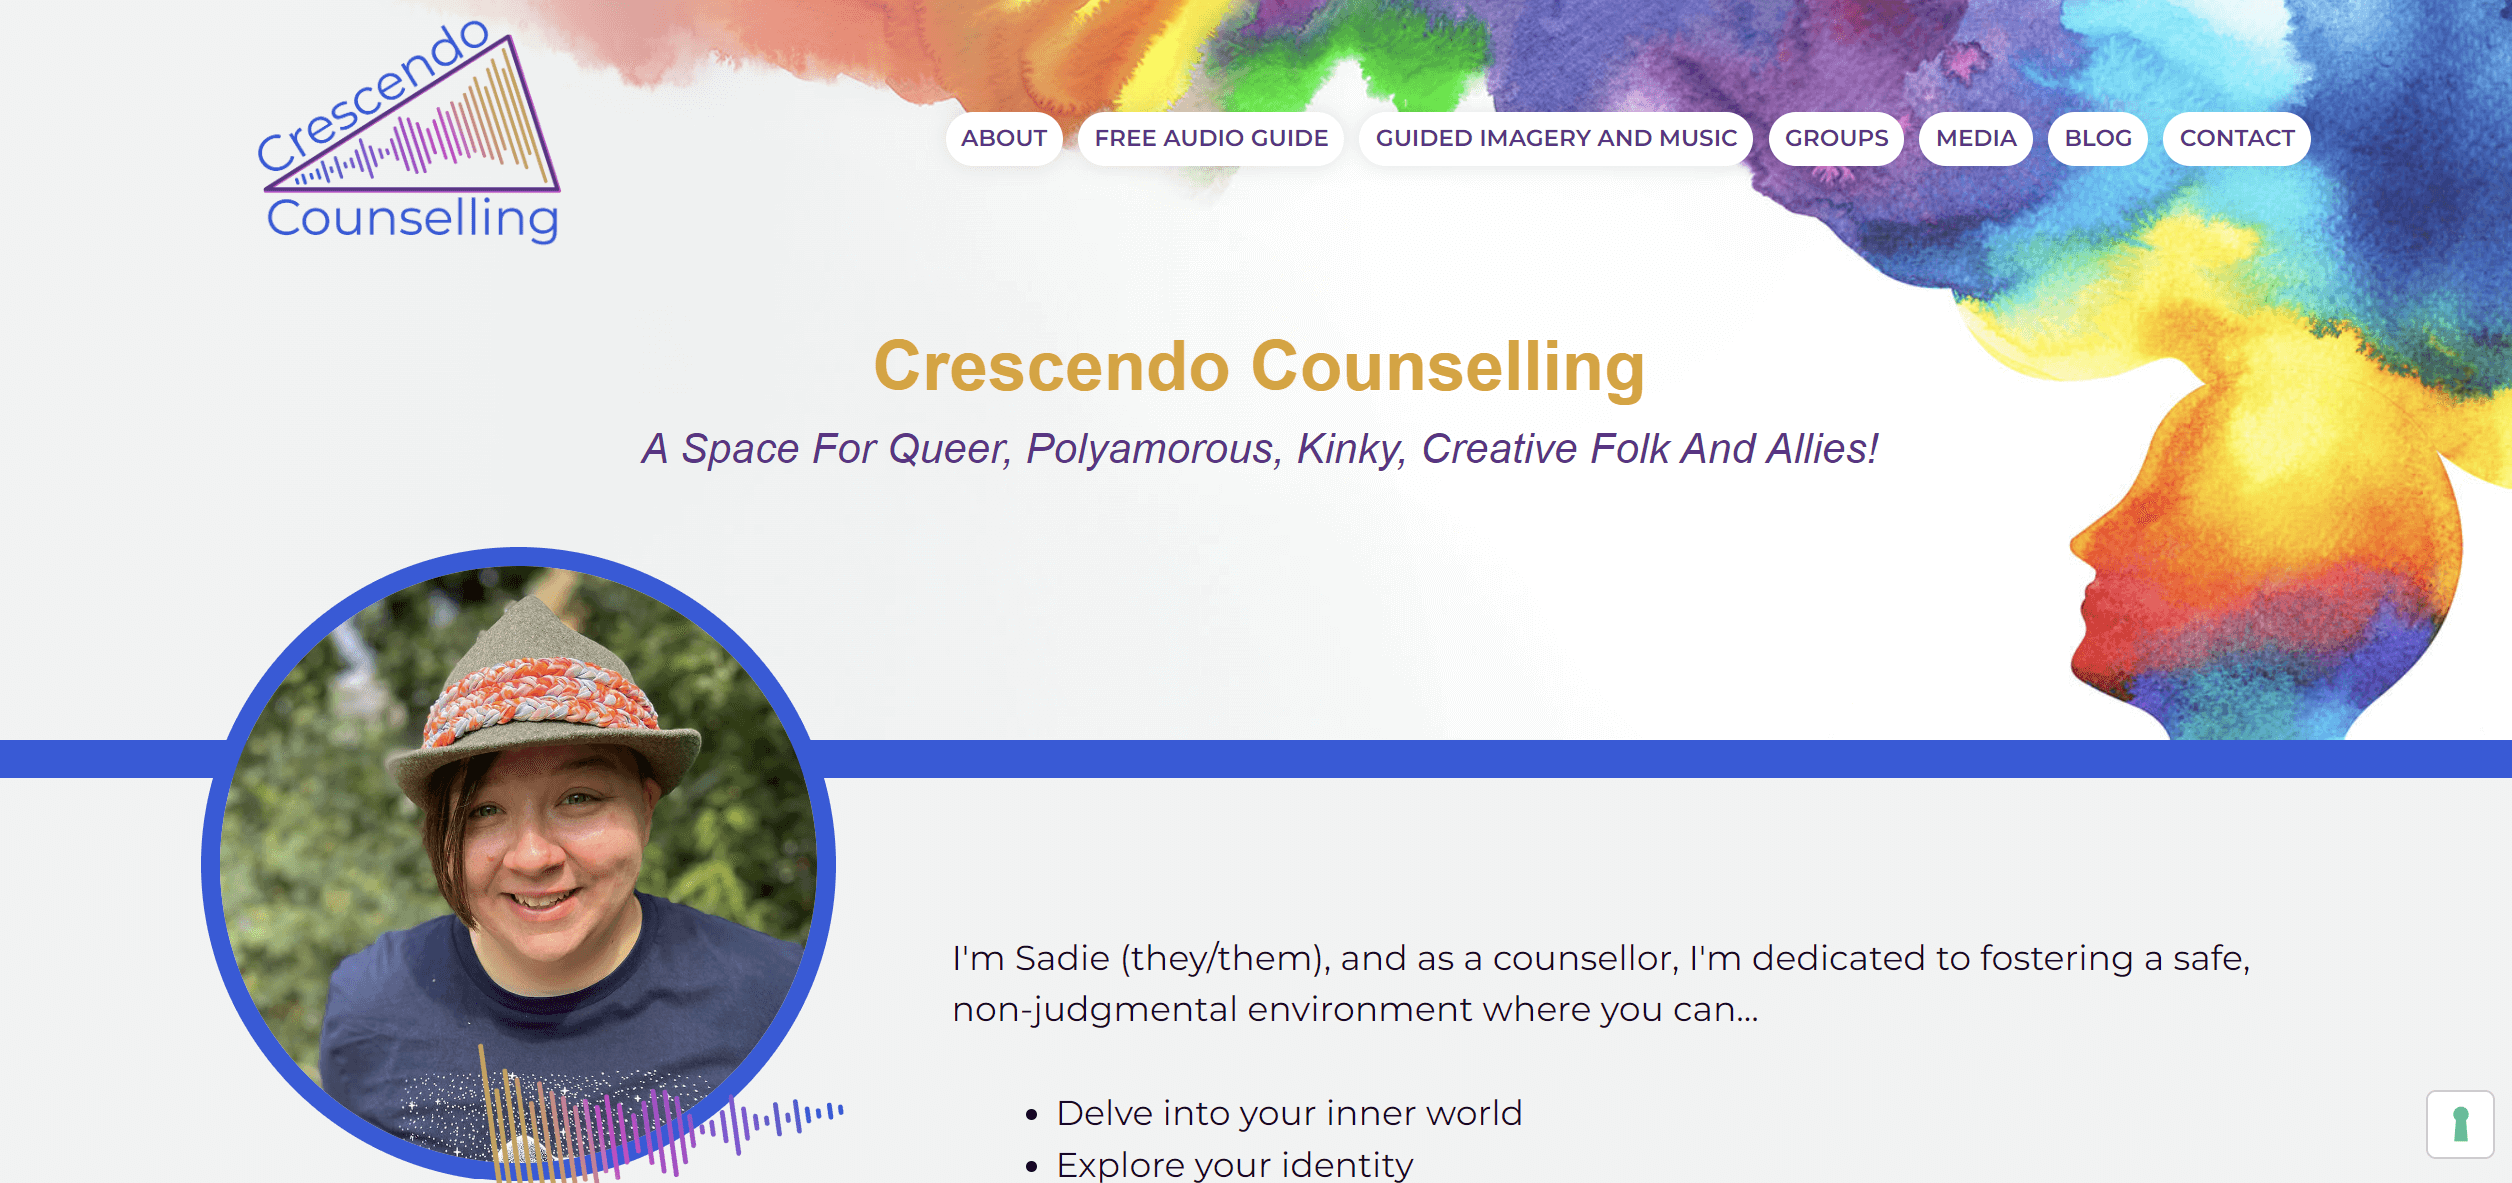 Crescendo Counselling - Queer Counselling in Berlin with Sadie Smith (they/ them)